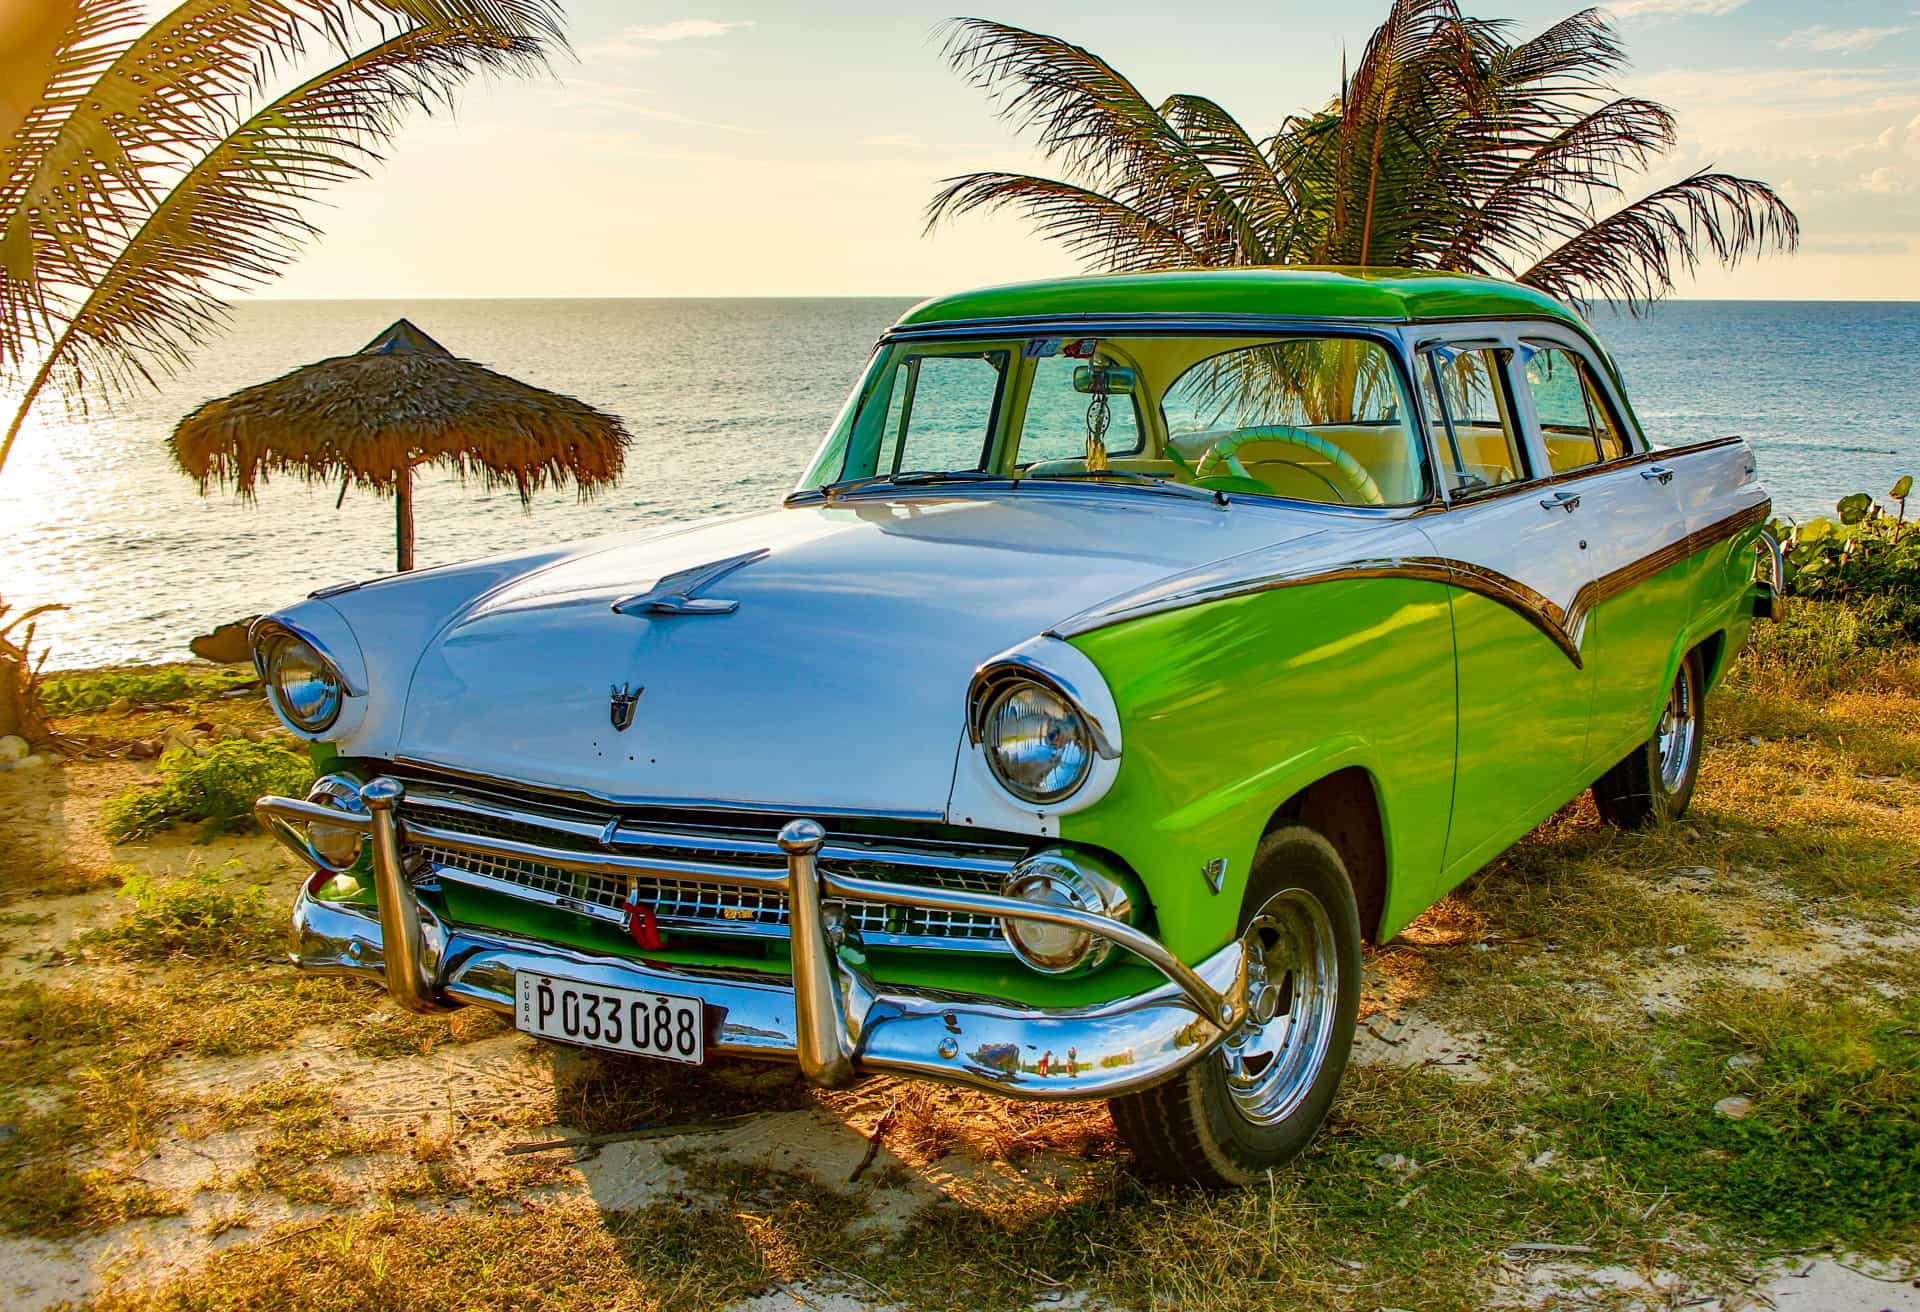 Models dating back to the 40s, 50s ,and 60s can be easily found in Cuba.